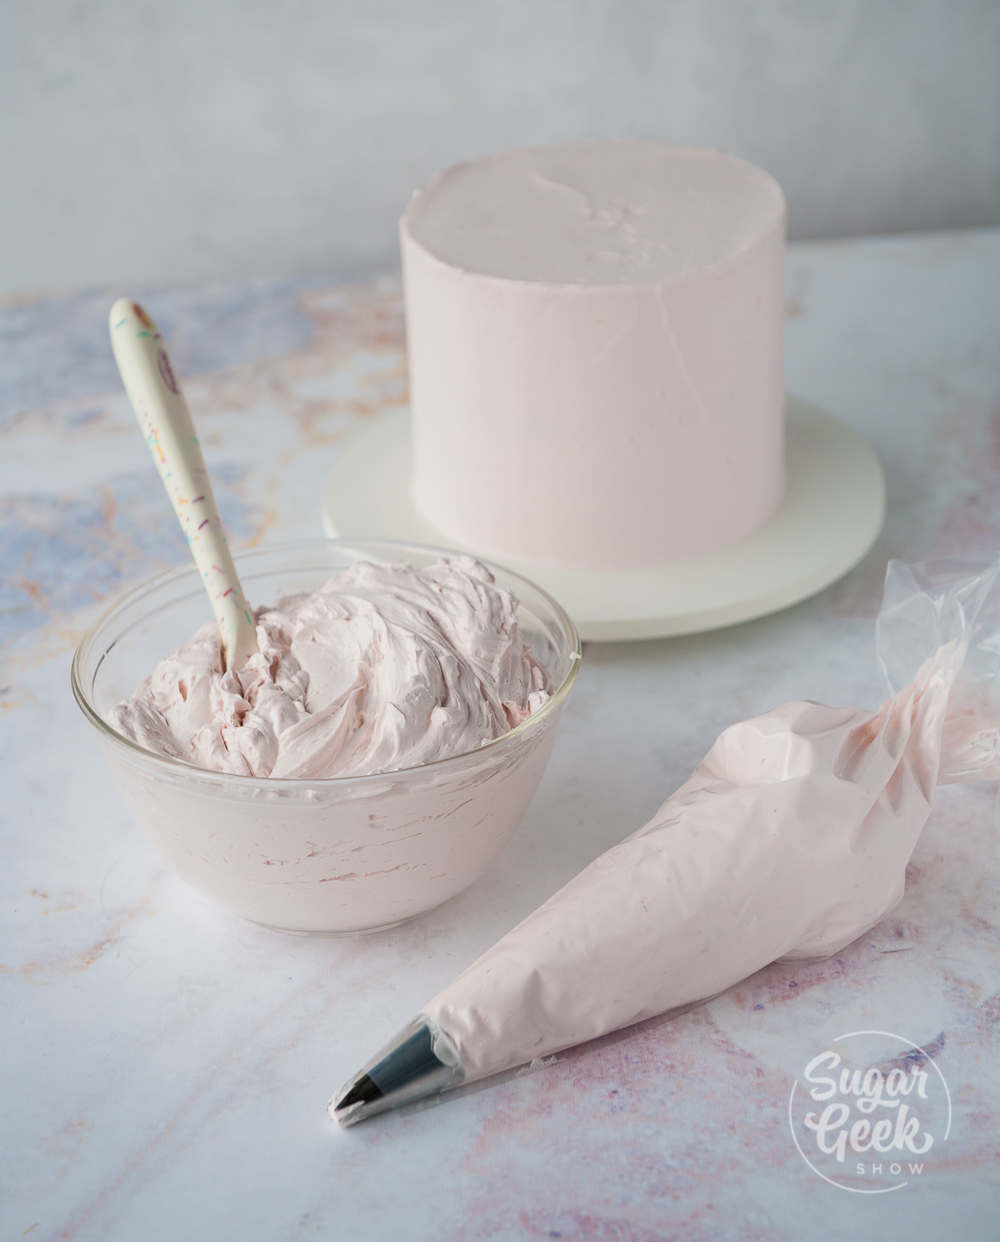 italian meringue buttercream in a bowl, piping bag and frosted no a cake